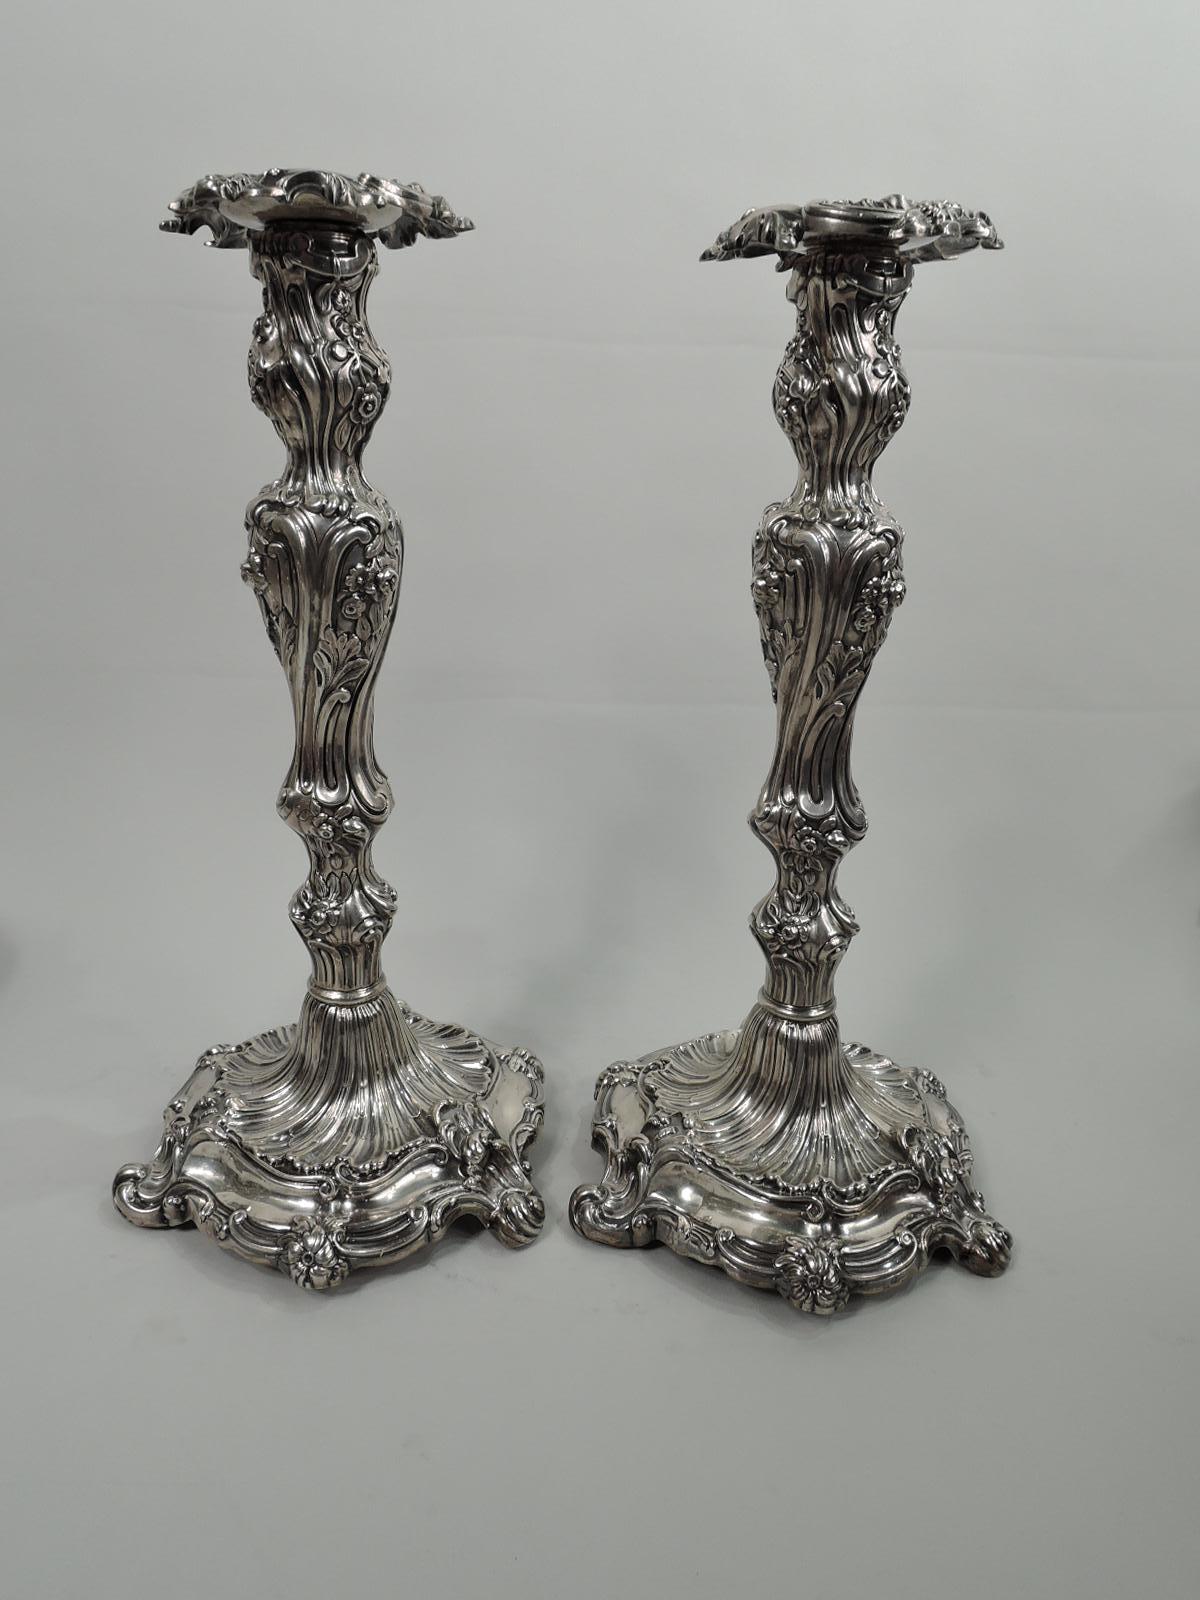 Pair of English Rococo sterling silver 5-light candelabra. Each: Knopped baluster shaft on round shaped base on 3 scrolled supports. Arms comprise central baluster shaft and 4 s-scrolled arms, each terminating in single socket on wax pan. Sockets